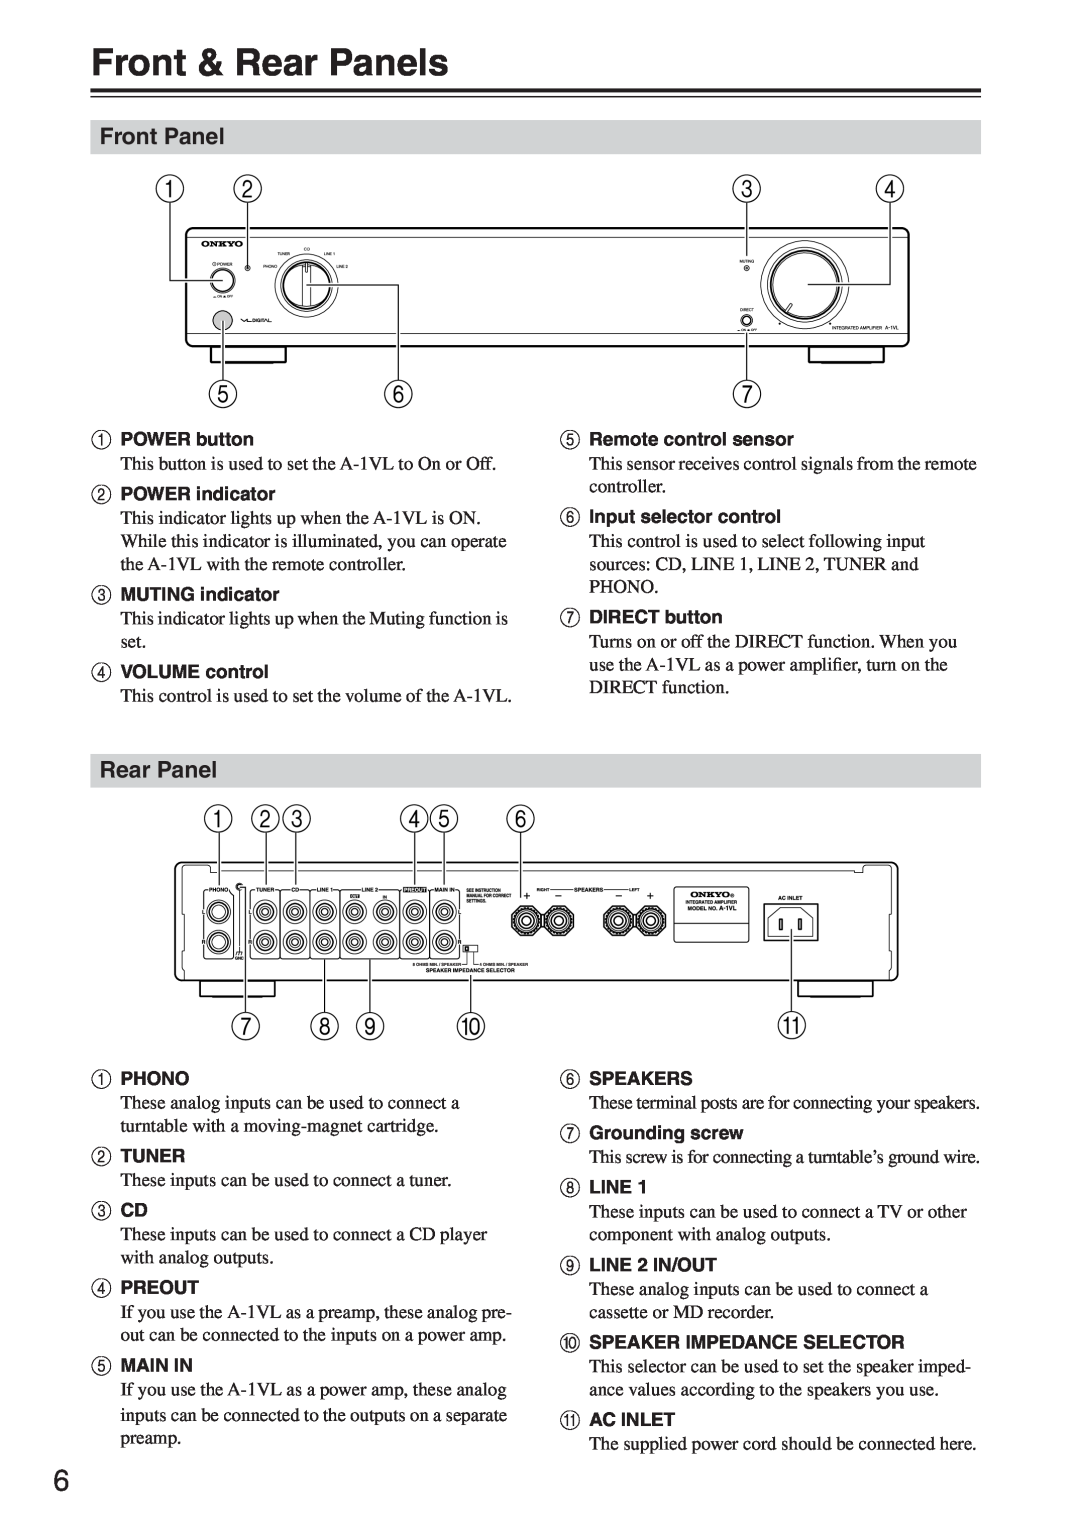 Onkyo A-1VL instruction manual Front & Rear Panels, Front Panel 